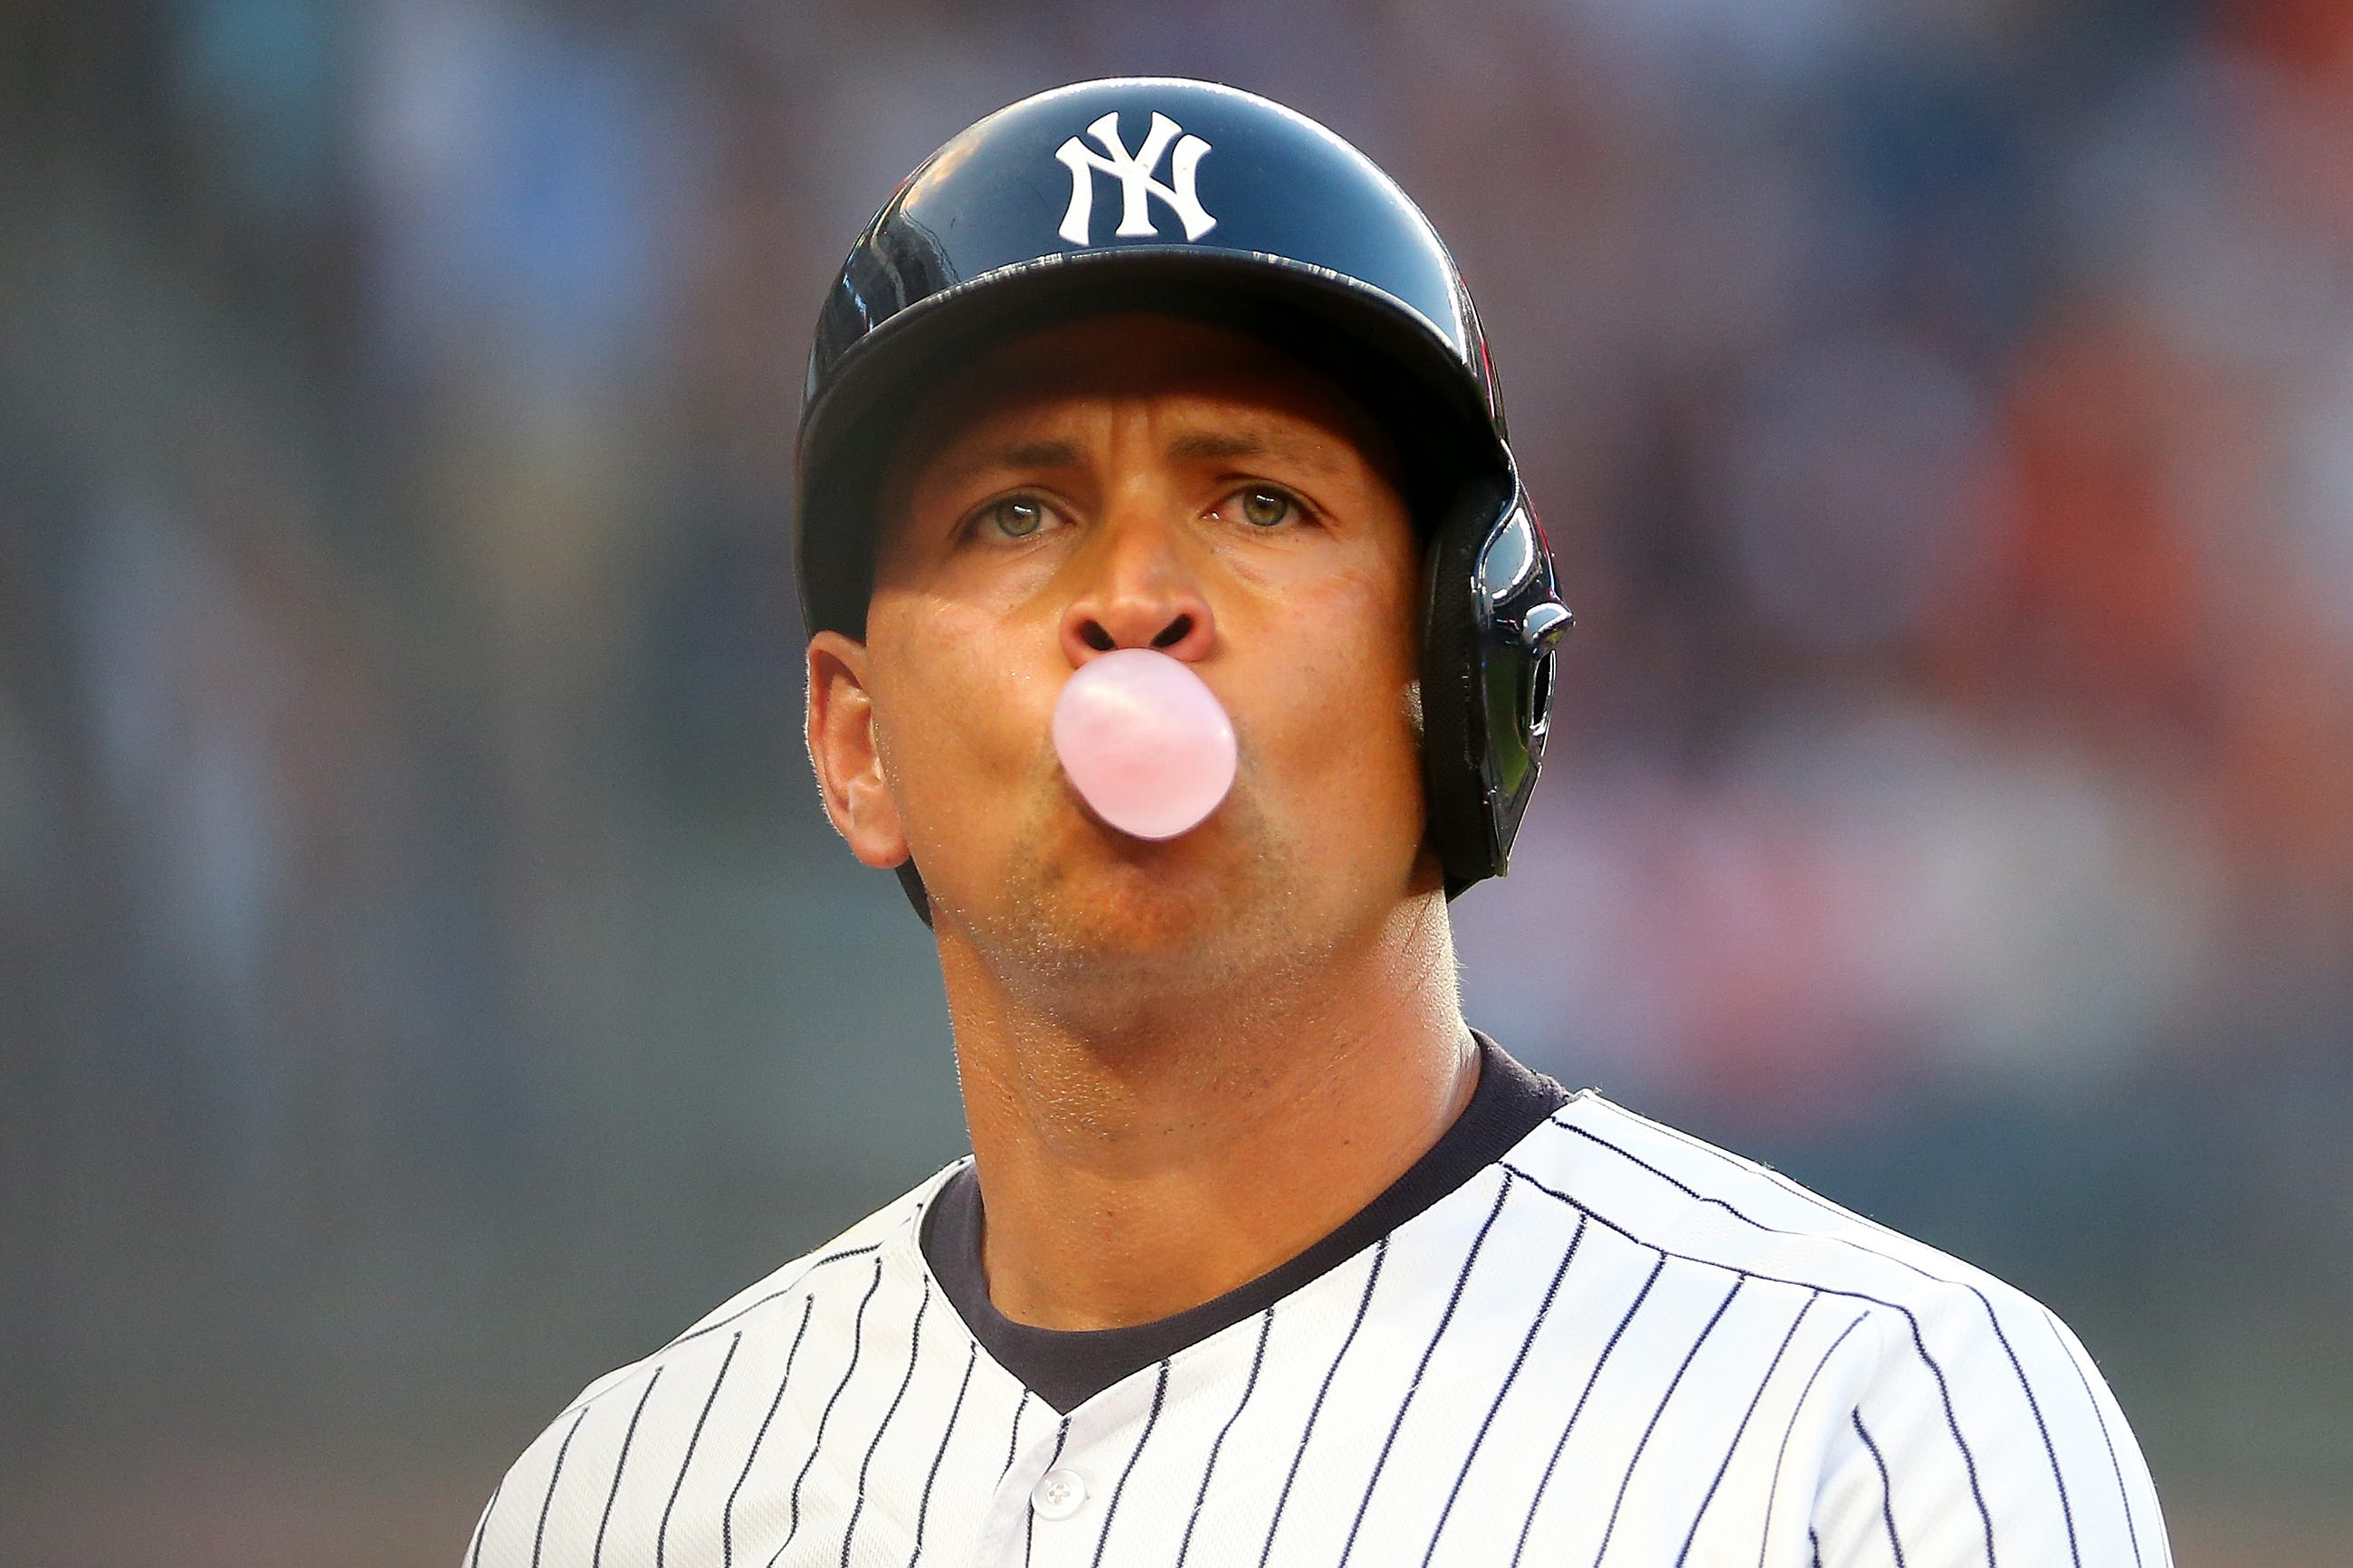 Why Isn’t Alex Rodriguez Playing When He’s So Close To 700 Home Runs?